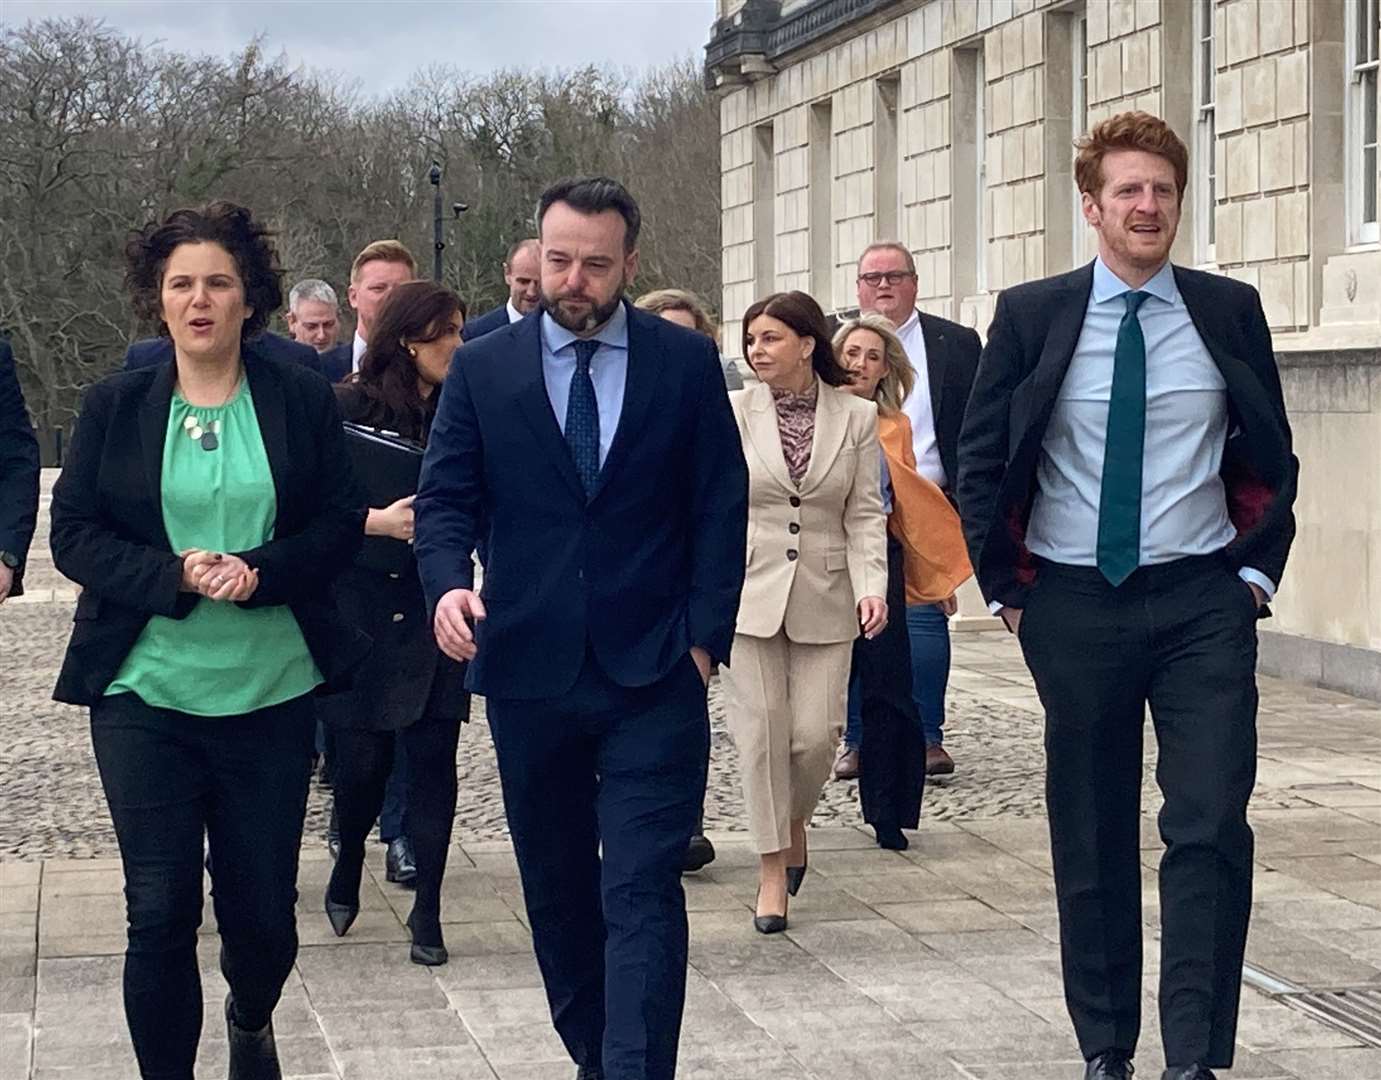 SDLP leader Colum Eastwood (centre), South Belfast MP Claire Hanna (left) and Opposition leader Matthew O’Toole lead their MLAs into Stormont ahead of the first official Opposition day (Rebecca Black/PA)